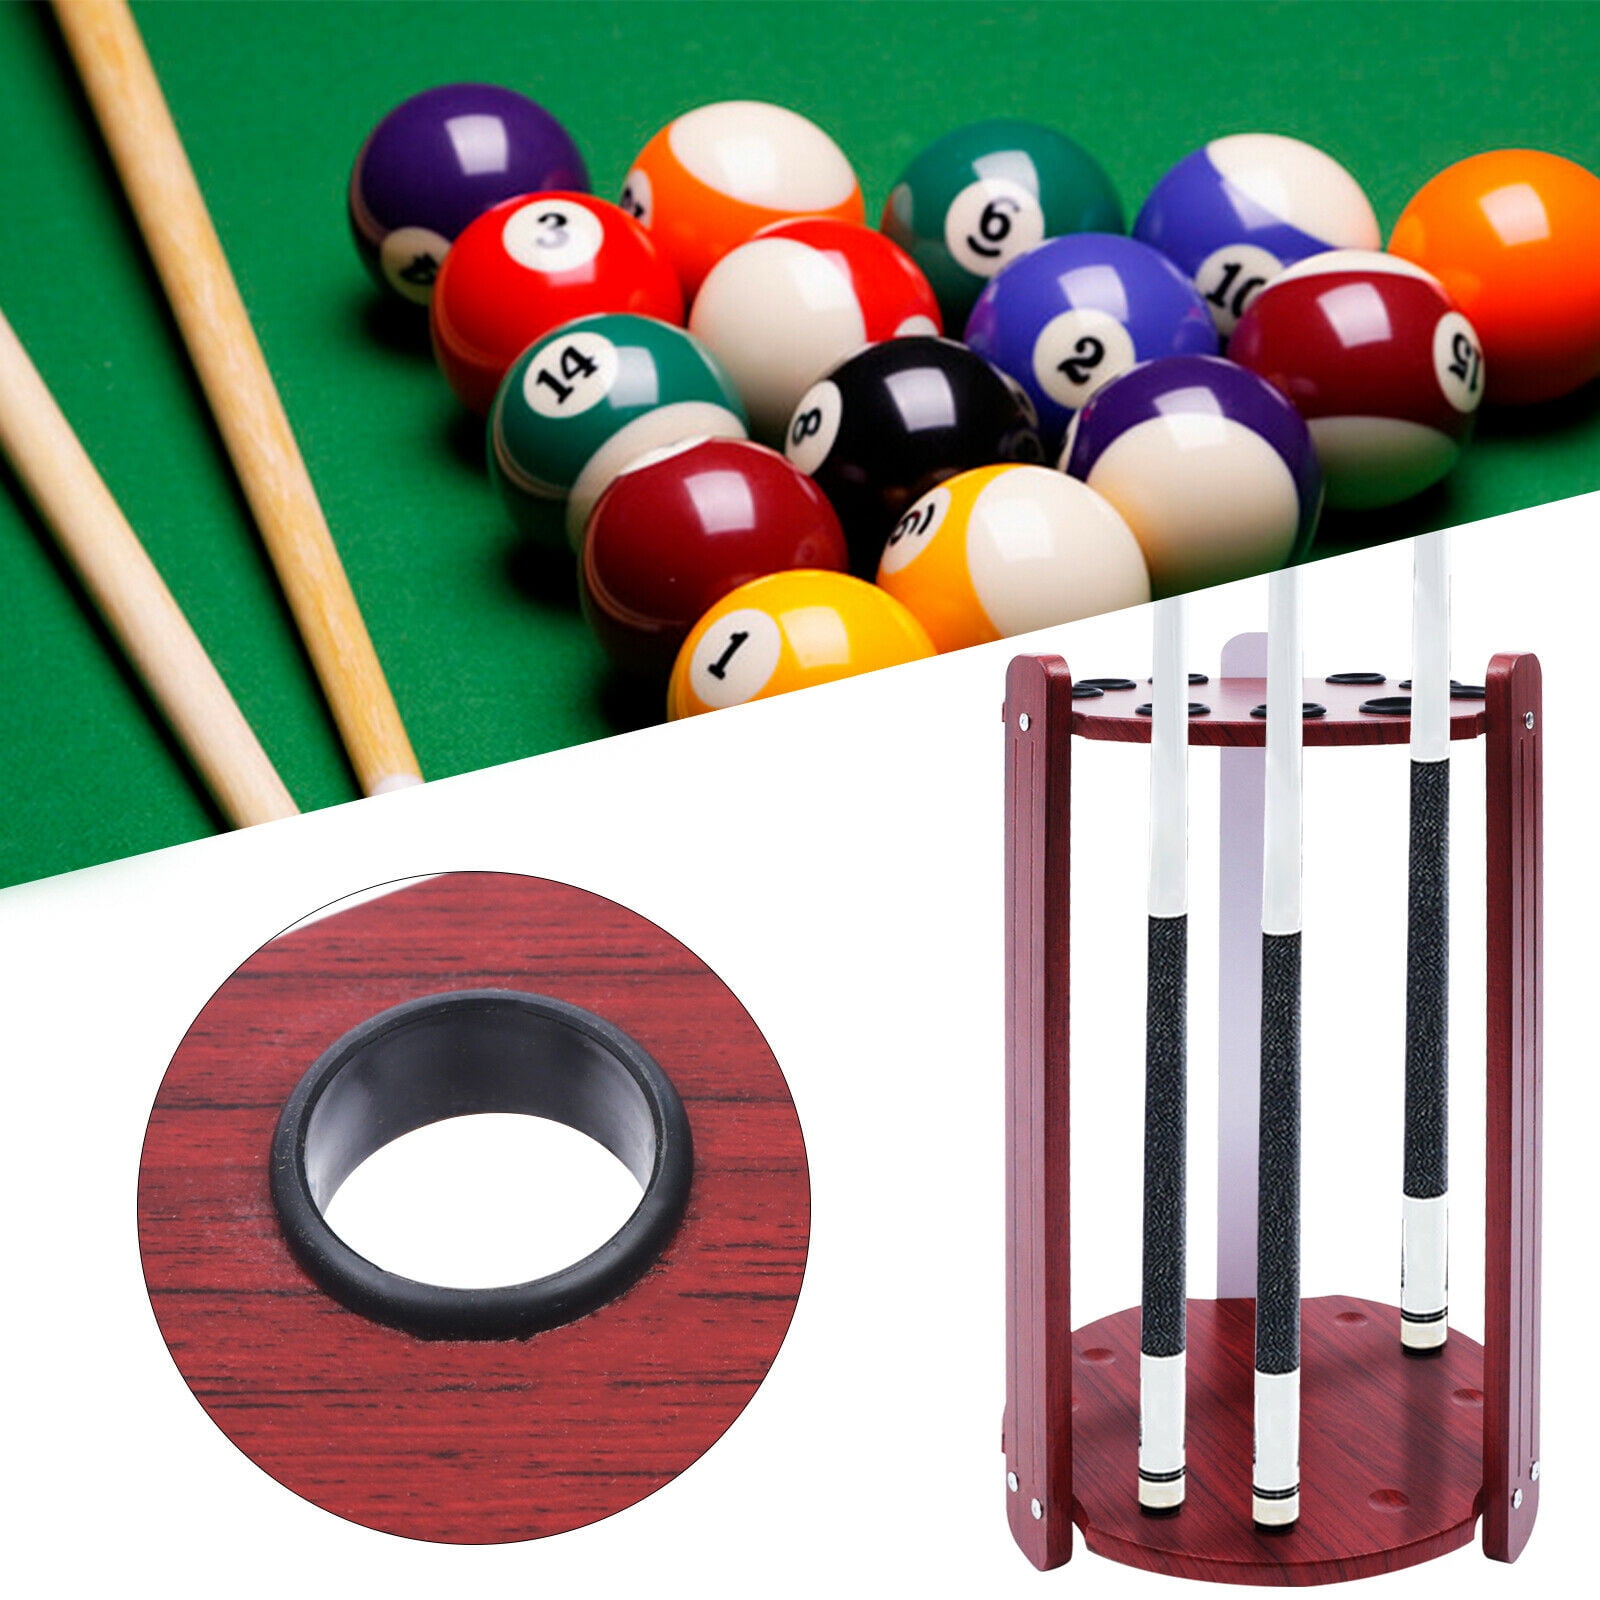 Pool Table Accessory Floor Corner Cue Rack Cue Stand Holds 12 Cues Easy to Clean Billiards Rack Holder for Pool Bars Clubs Billiard Players Homes 